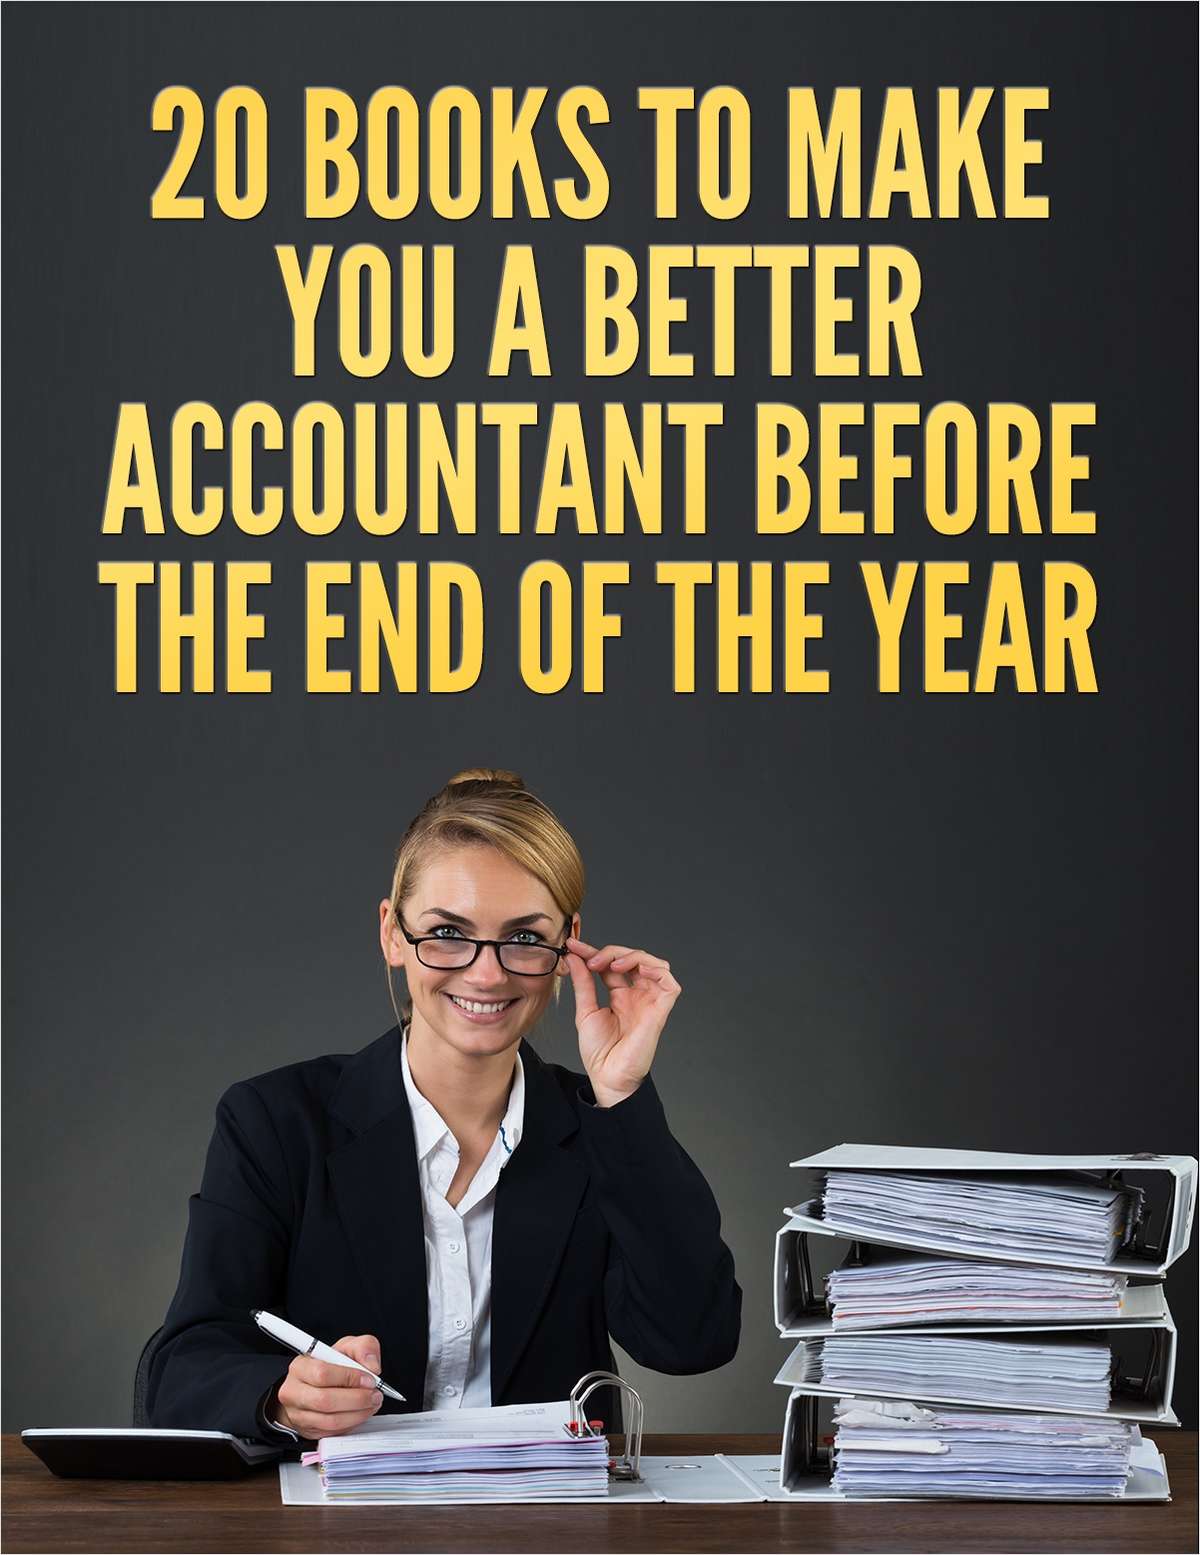 20 Books to Make You a Better Accountant Before the End of the Year